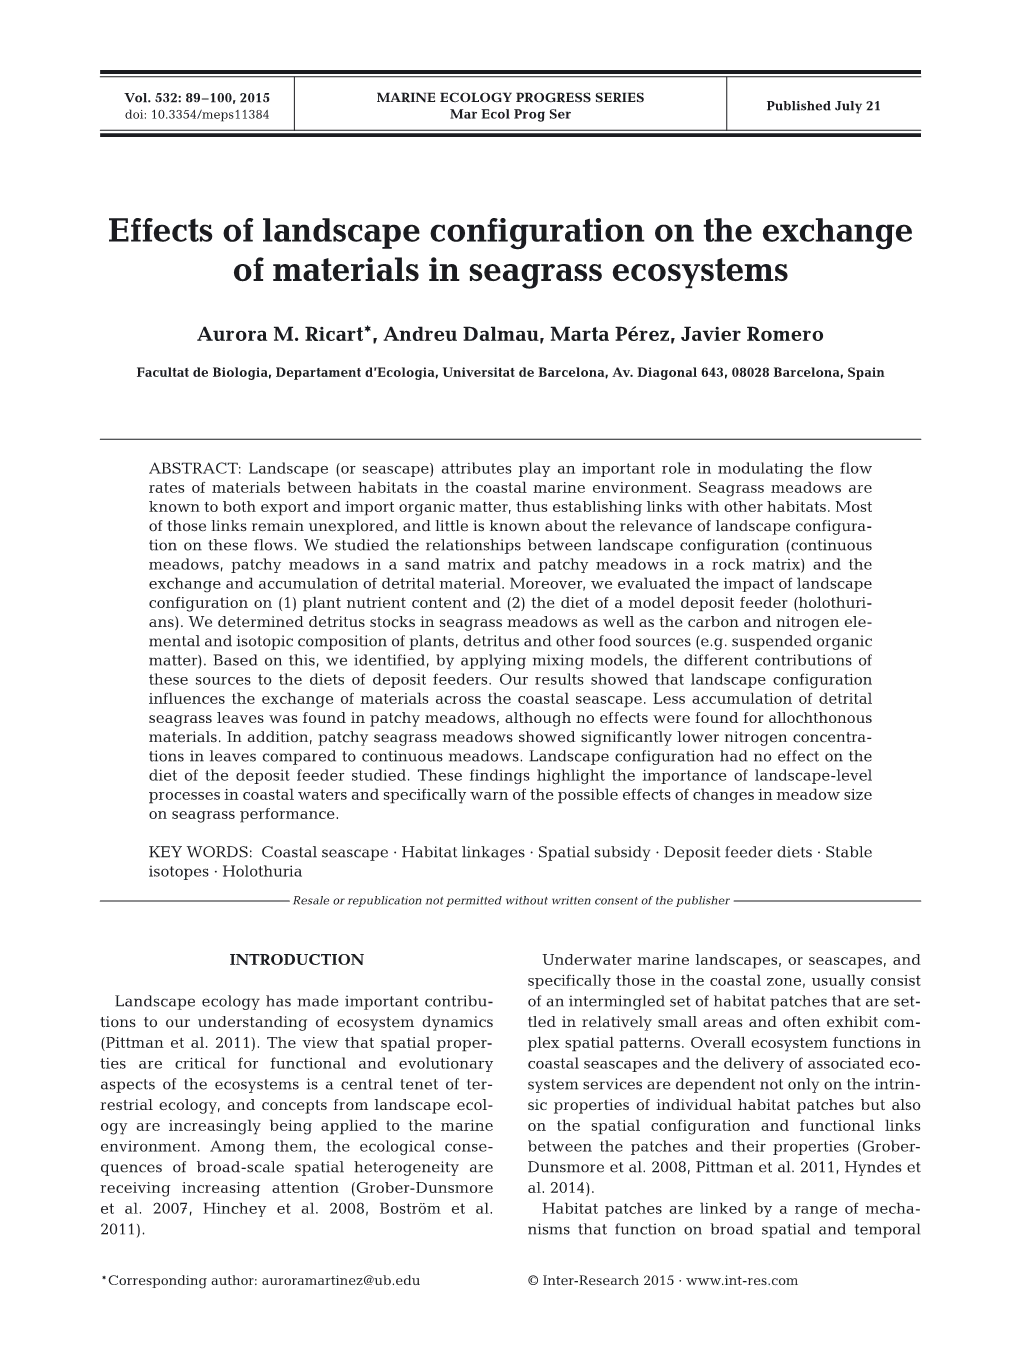 Effects of Landscape Configuration on the Exchange of Materials in Seagrass Ecosystems